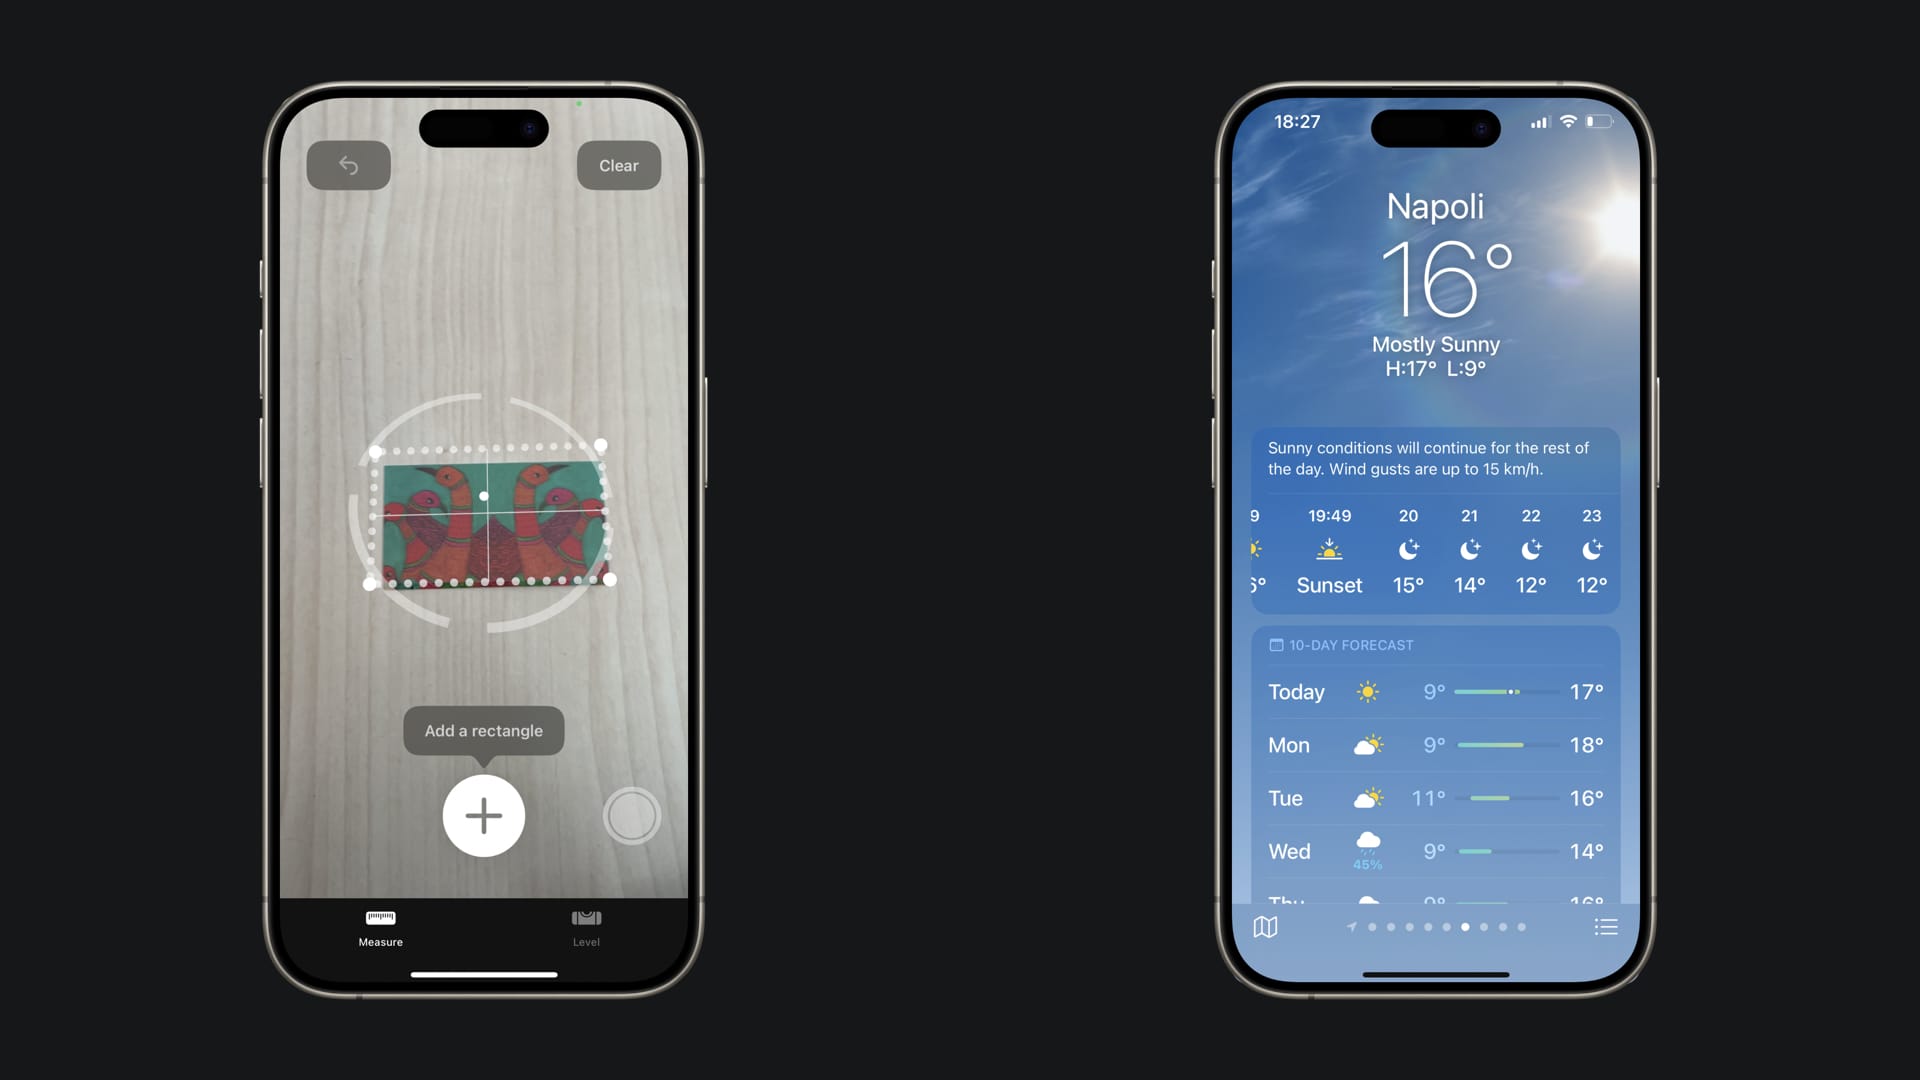 First example show the Measure app interface and the second example show the Weather app interface